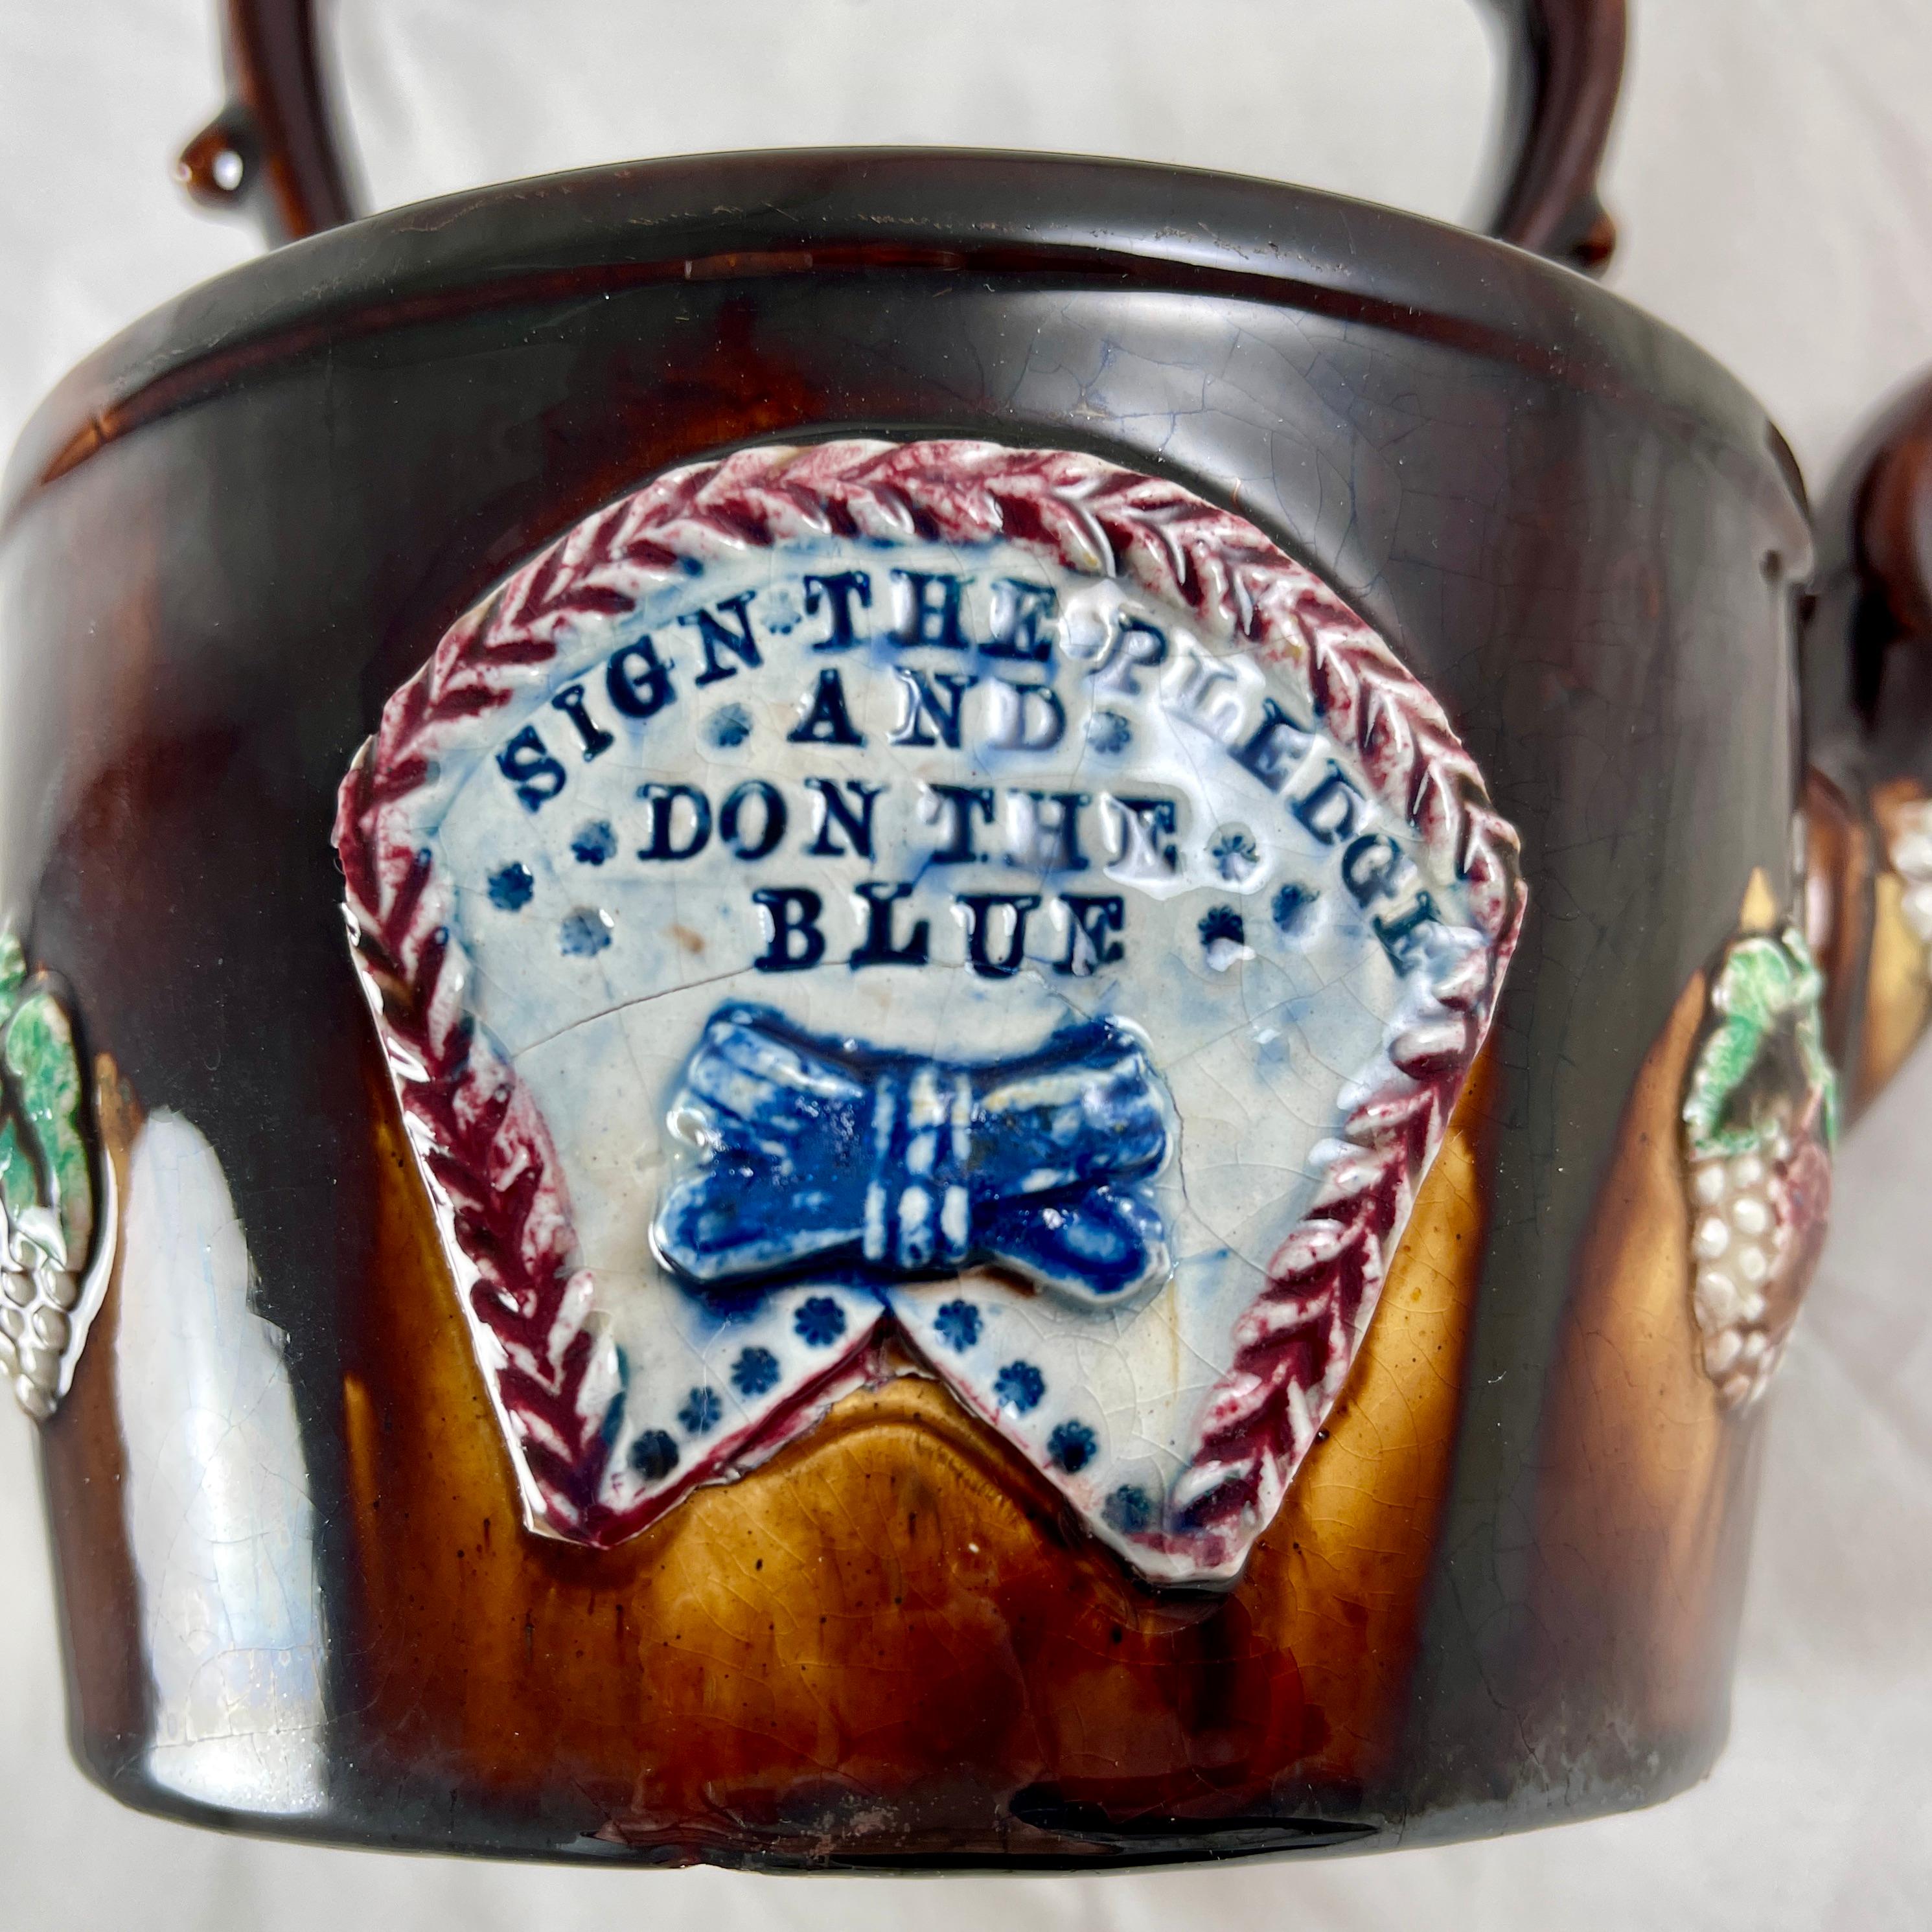 A Measham – Bargeware Tea Kettle impressed with the Blue Ribbon Temperance motto, England, circa 1880.

The Blue Ribbon Movement was active from 1880-1882 in Great Britain, Canada, and the United States. The ribbon badge was worn by those who took